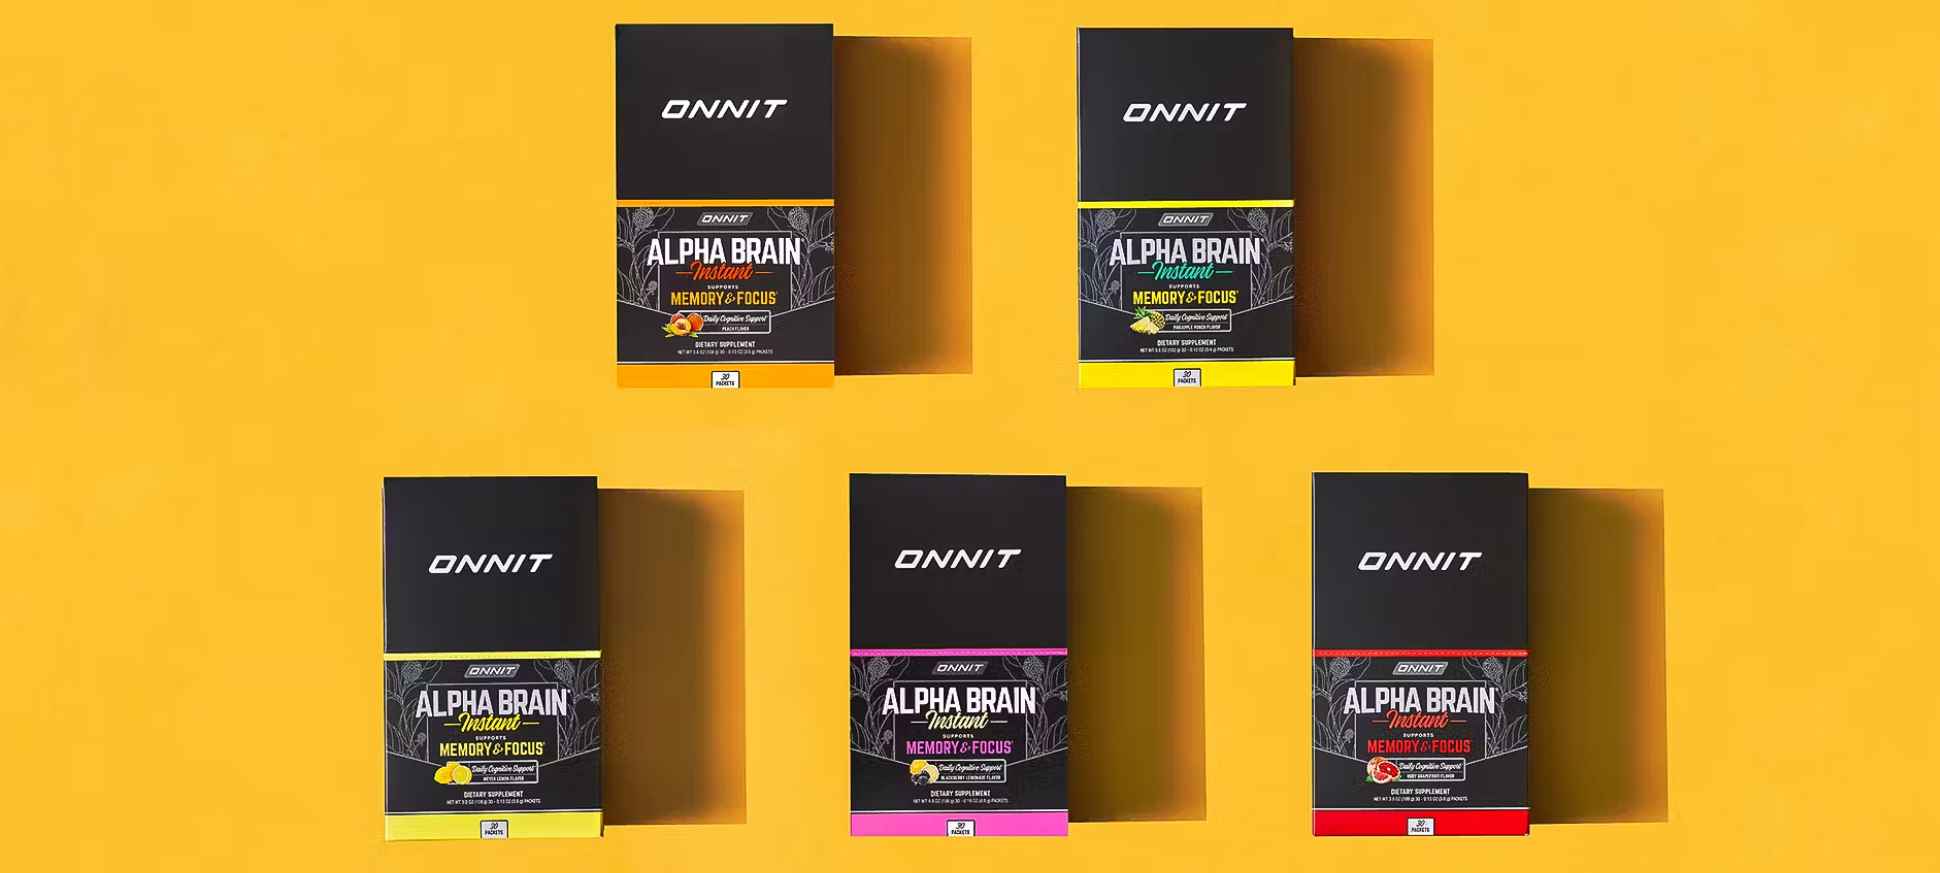 Onnit on X: #GetOnnit at The Vitamin Shoppe 💪 We're thrilled to